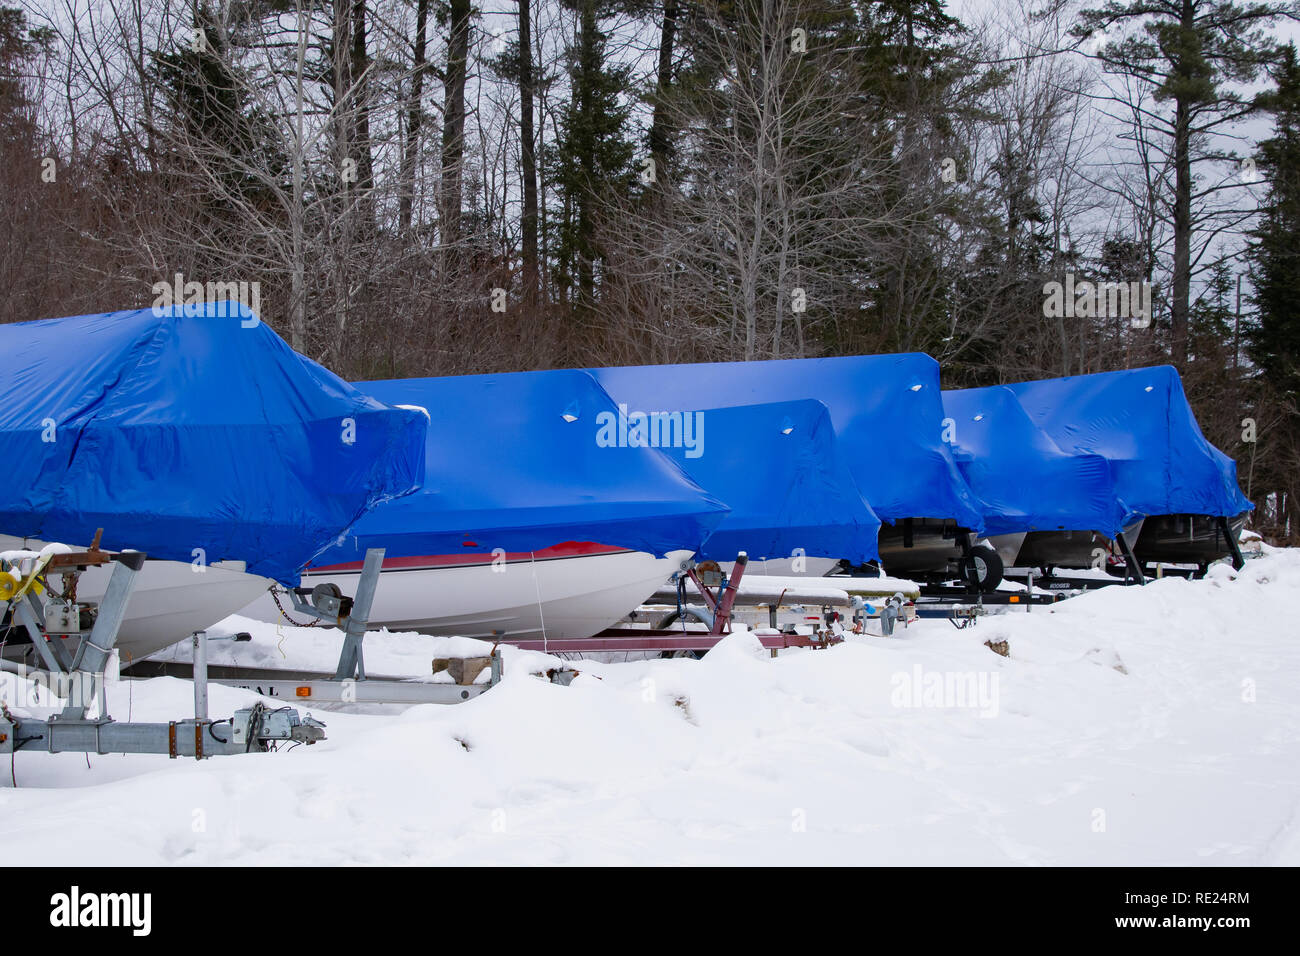 A row of boats sitting on trailers in the snow covered with blue polymer plastic film shrink wrap for protection in Speculator, NY USA Stock Photo